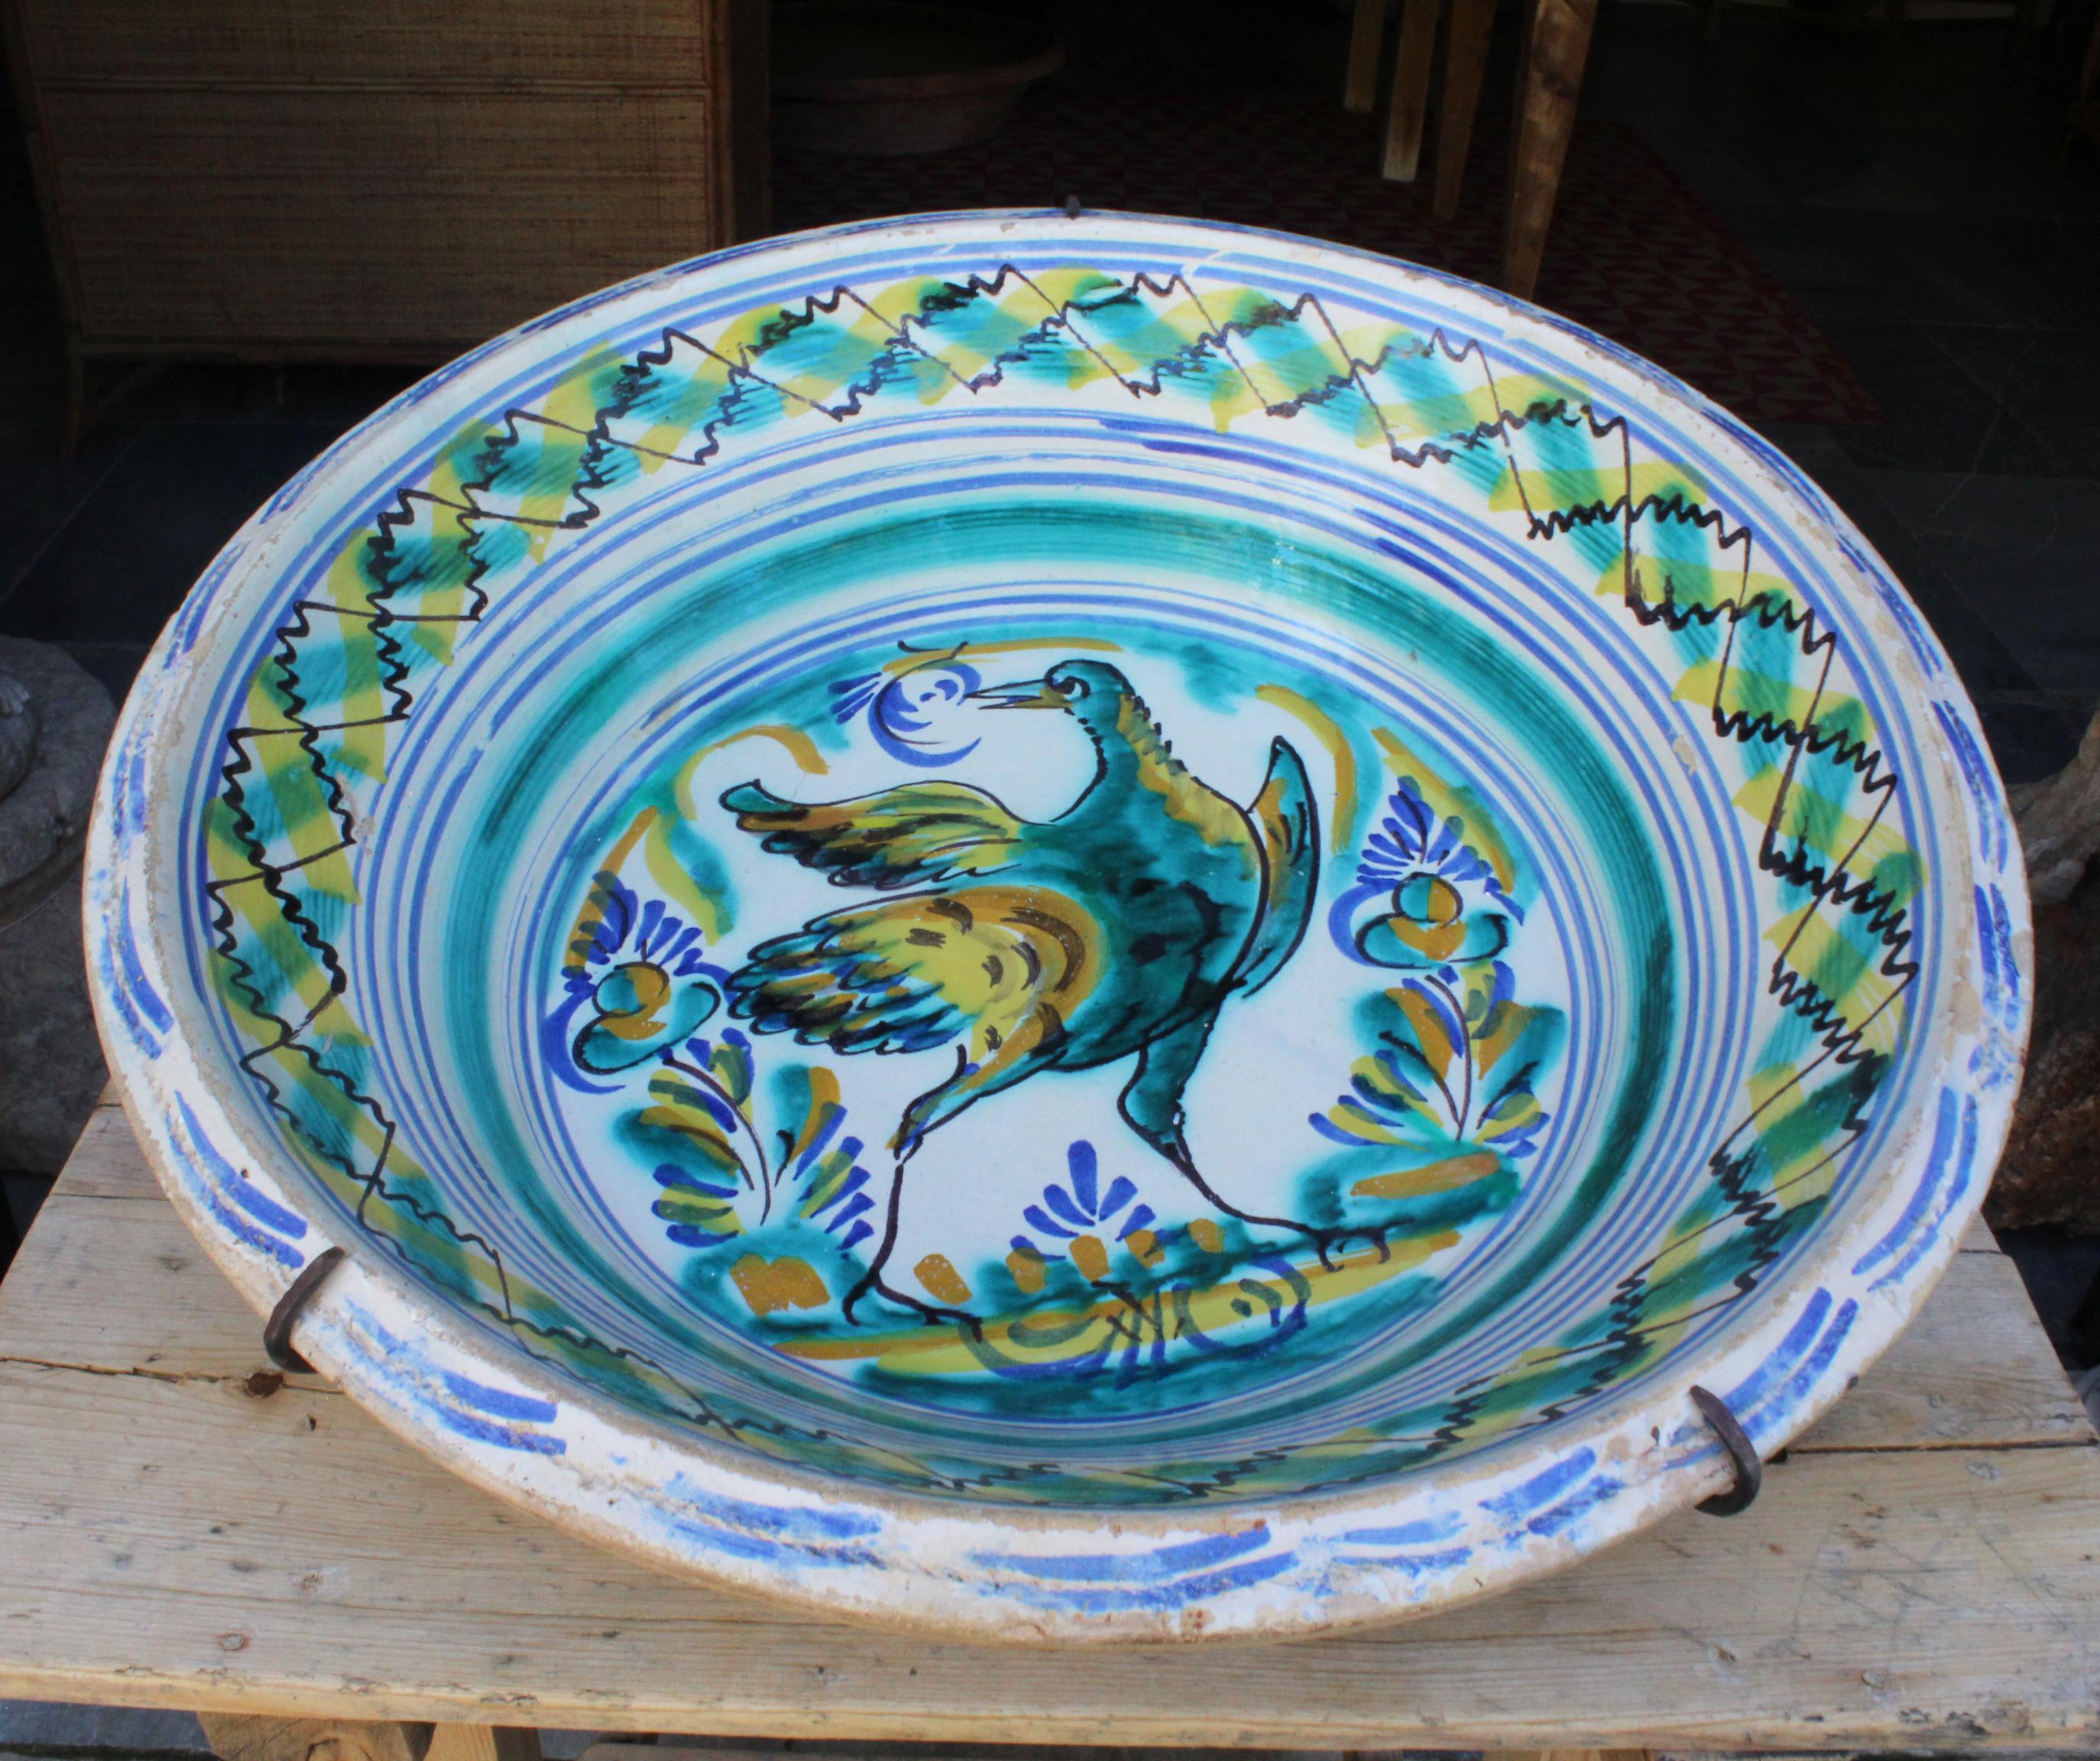 19th century Spanish Triana Whit green, blue and yellow glazed terracotta plate

Triana is a style that originates in Seville, known for its mix of Christian and Al-Andalus cultures.

With essence of a town and trees in the middle and geometric